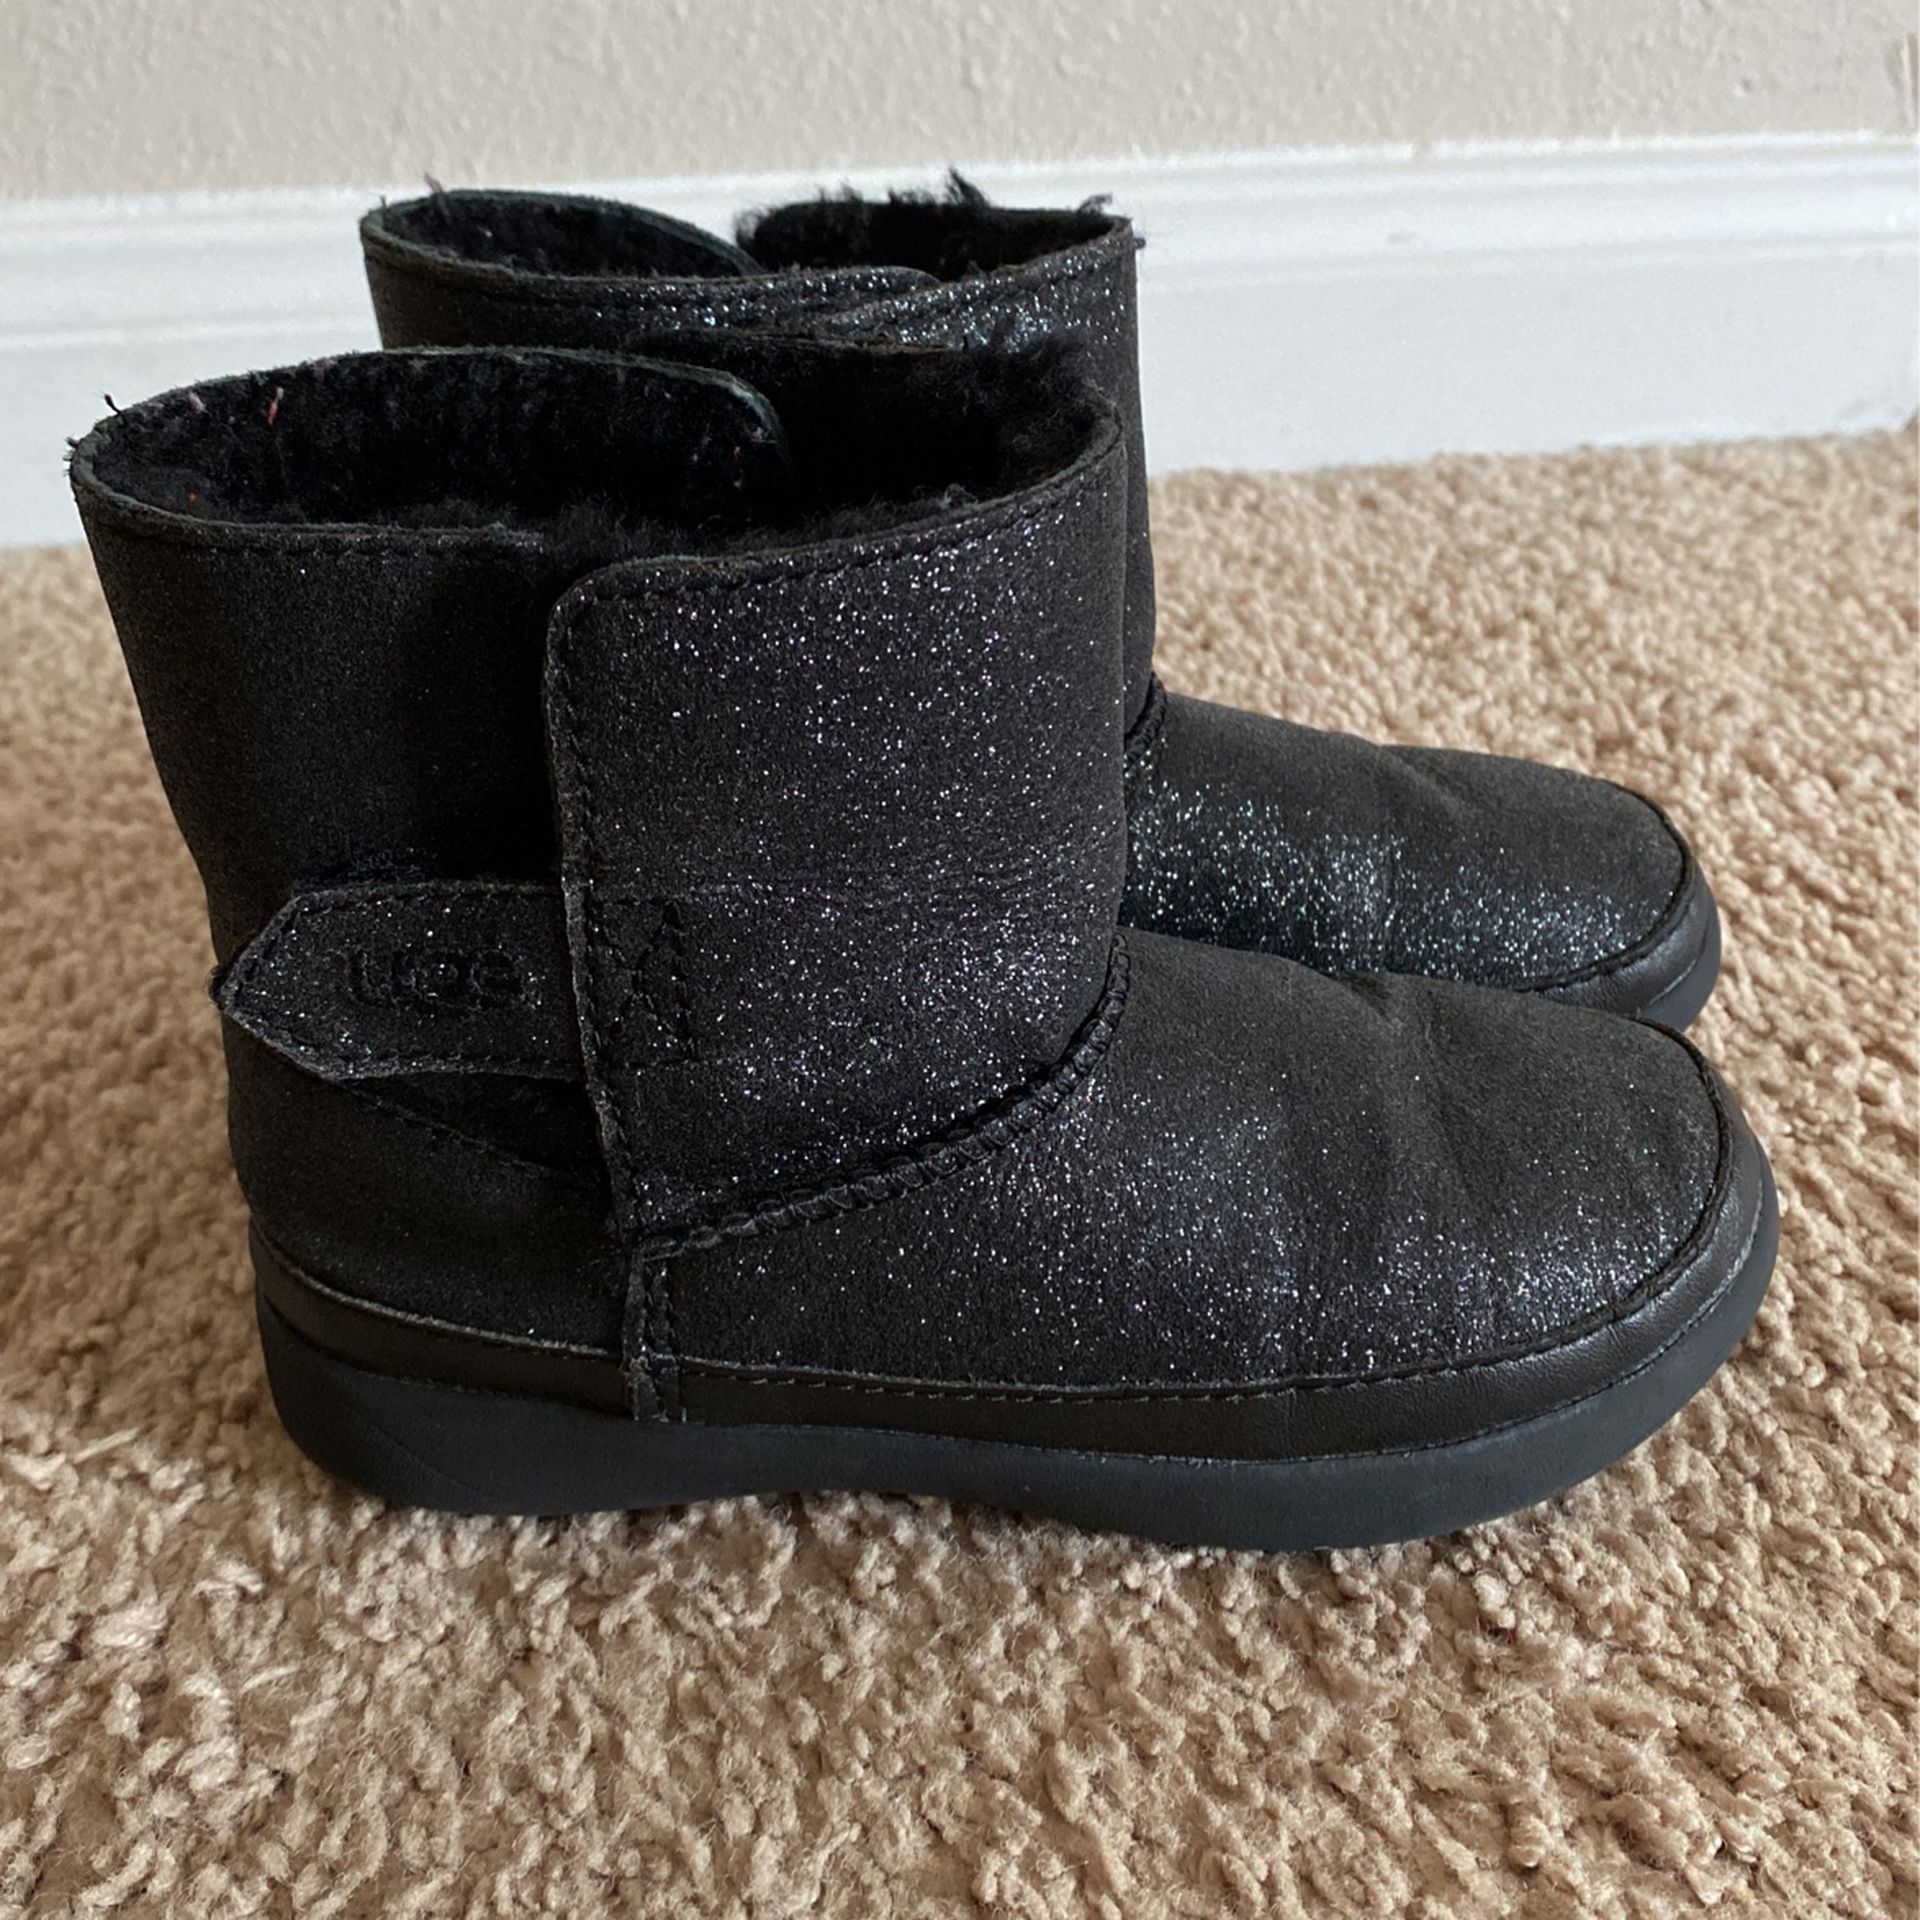 Toddler Ugg Boots Size 10c